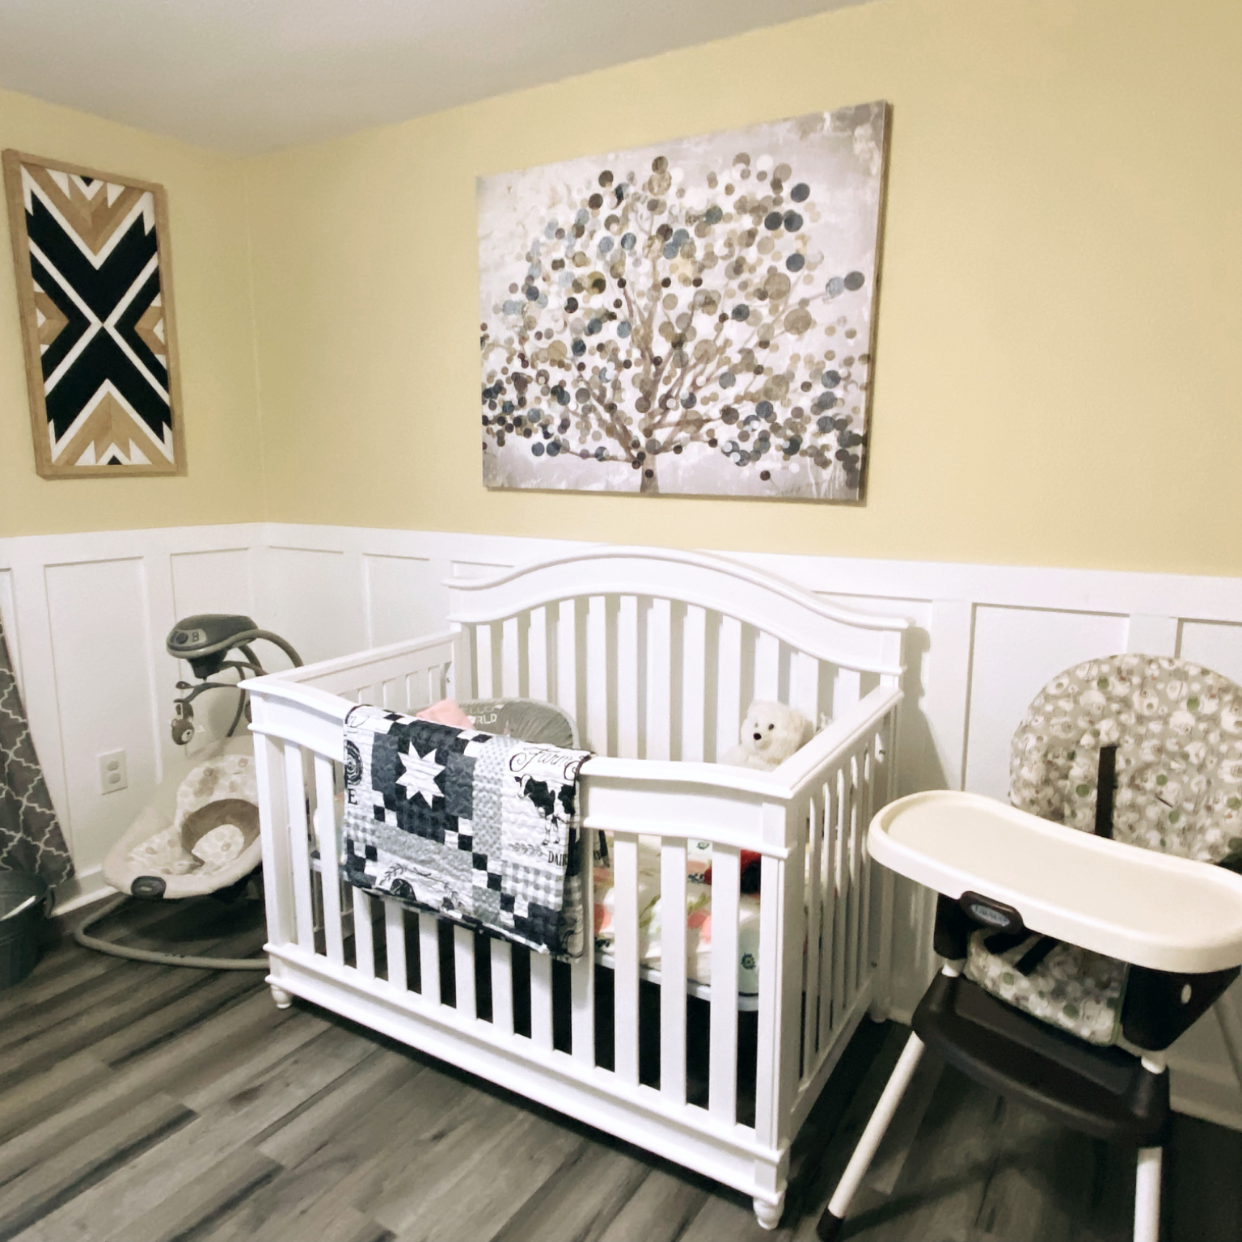 Our nursery is ready for baby! 